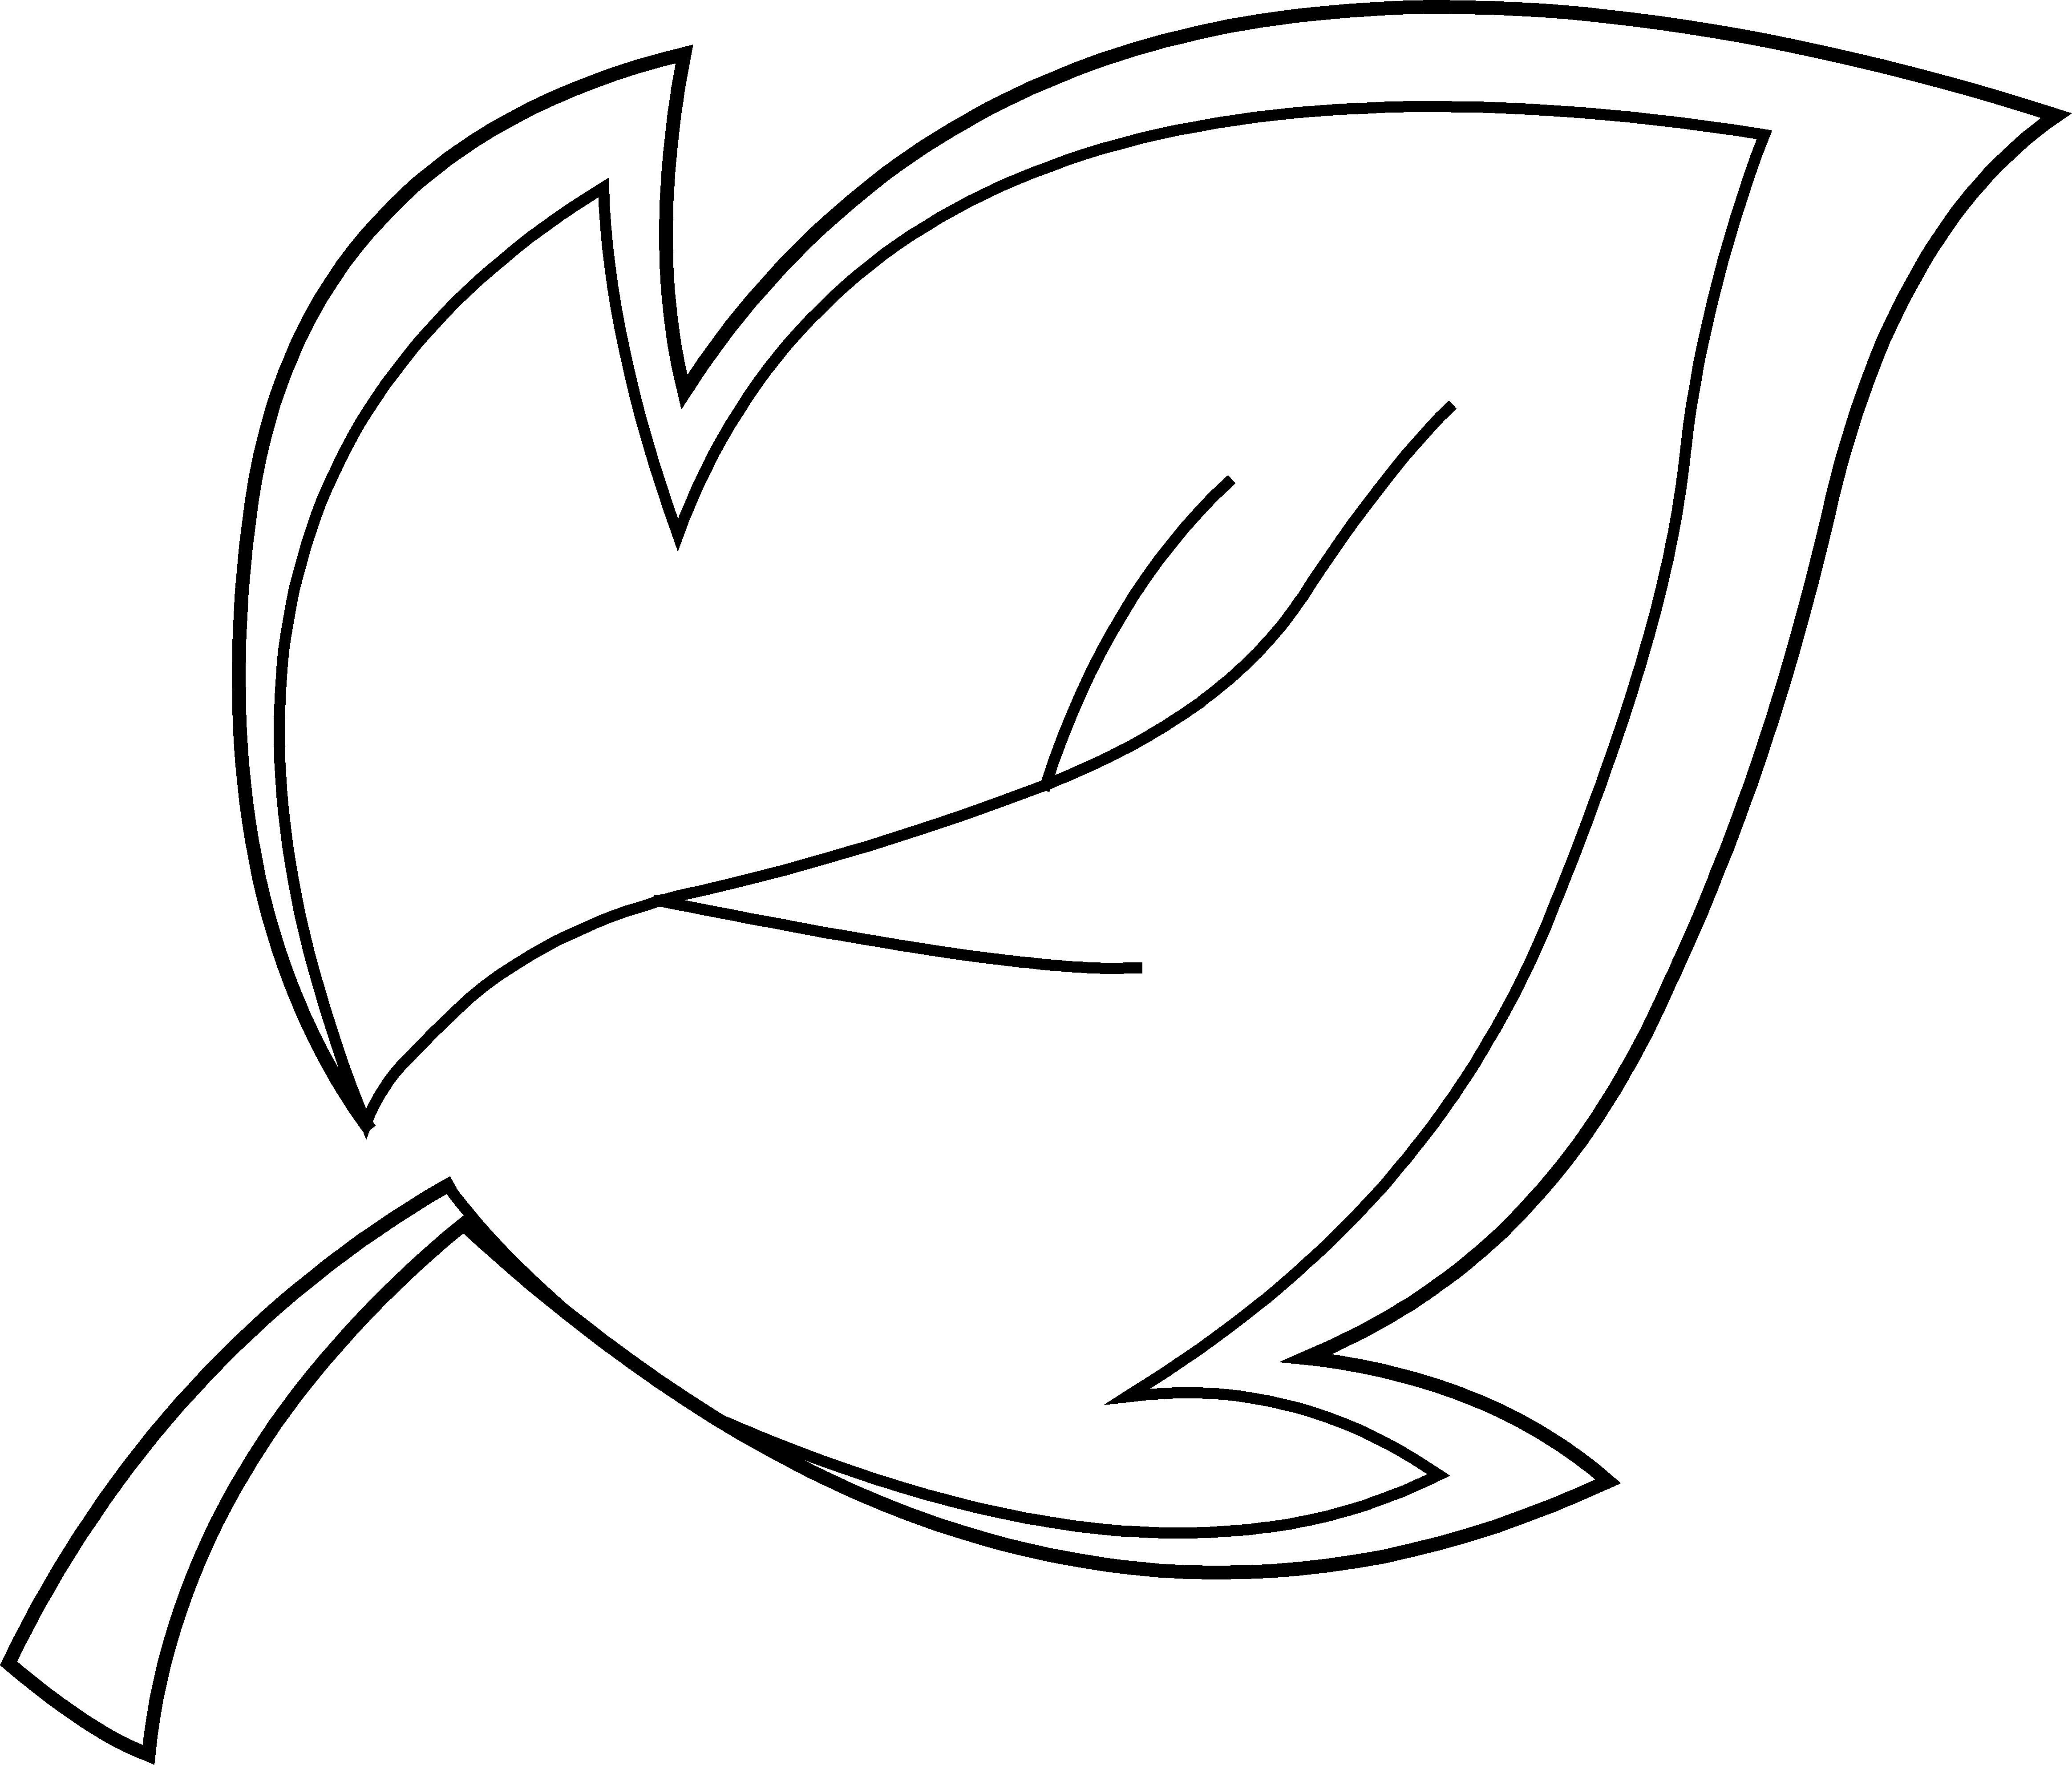 Tree Leaf Coloring Page - Free Clip Art